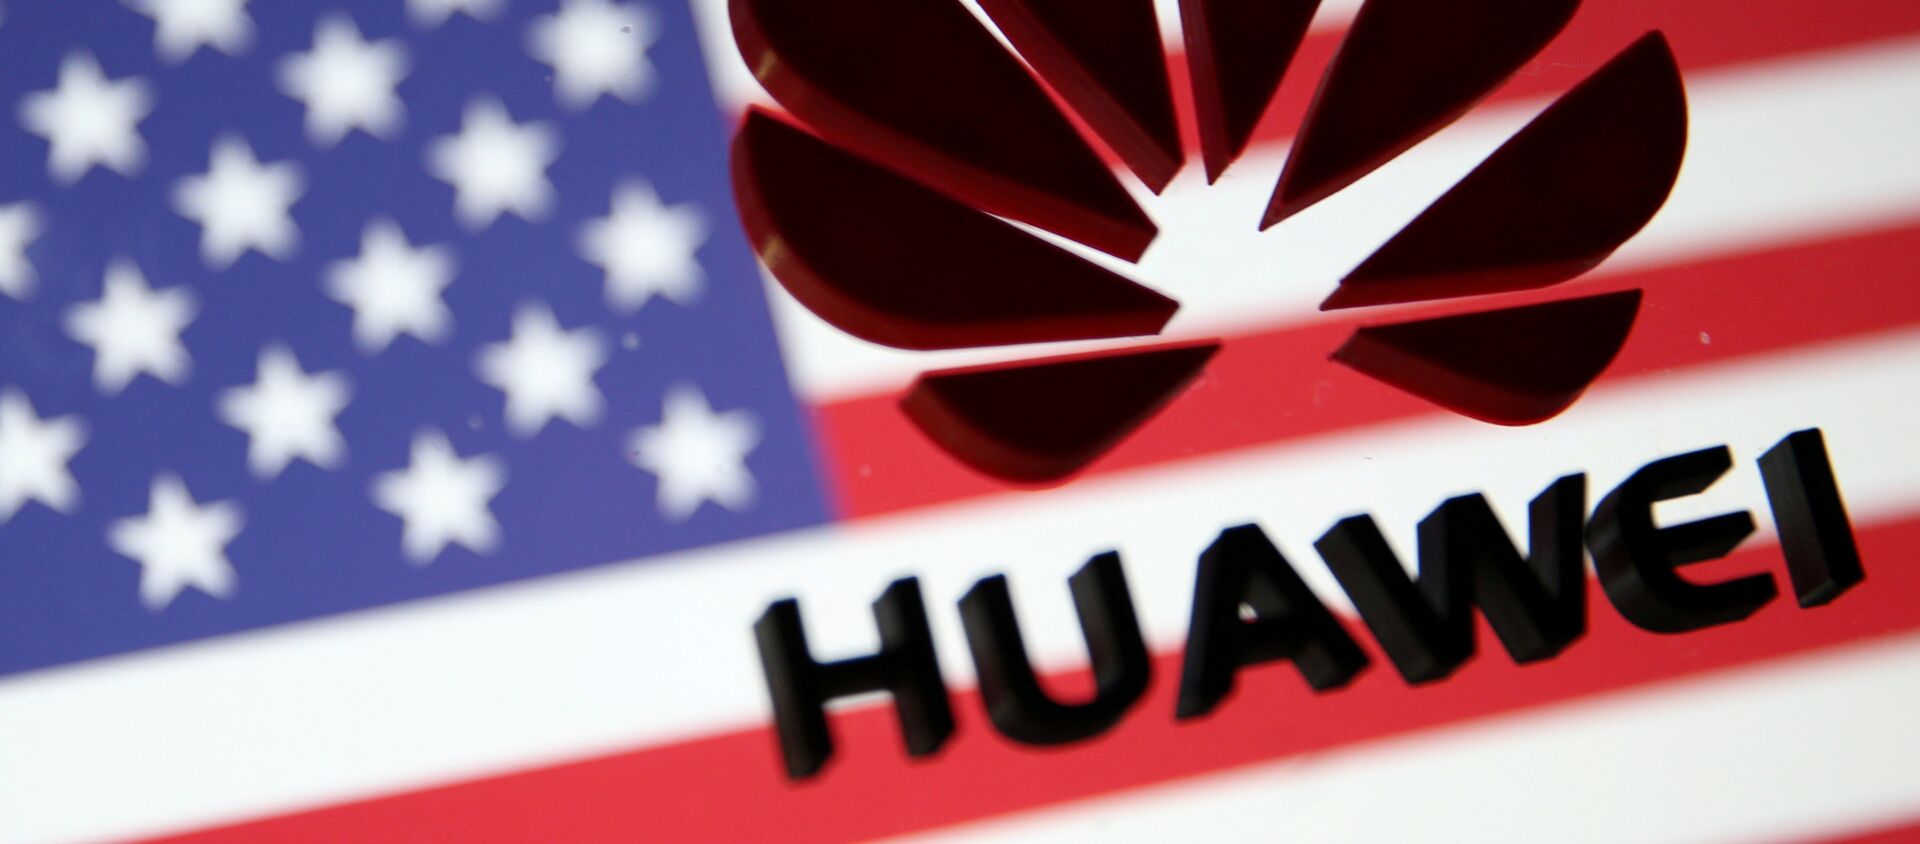 A 3D printed Huawei logo is placed on glass above a displayed U.S. flag in this illustration - 俄罗斯卫星通讯社, 1920, 18.06.2021